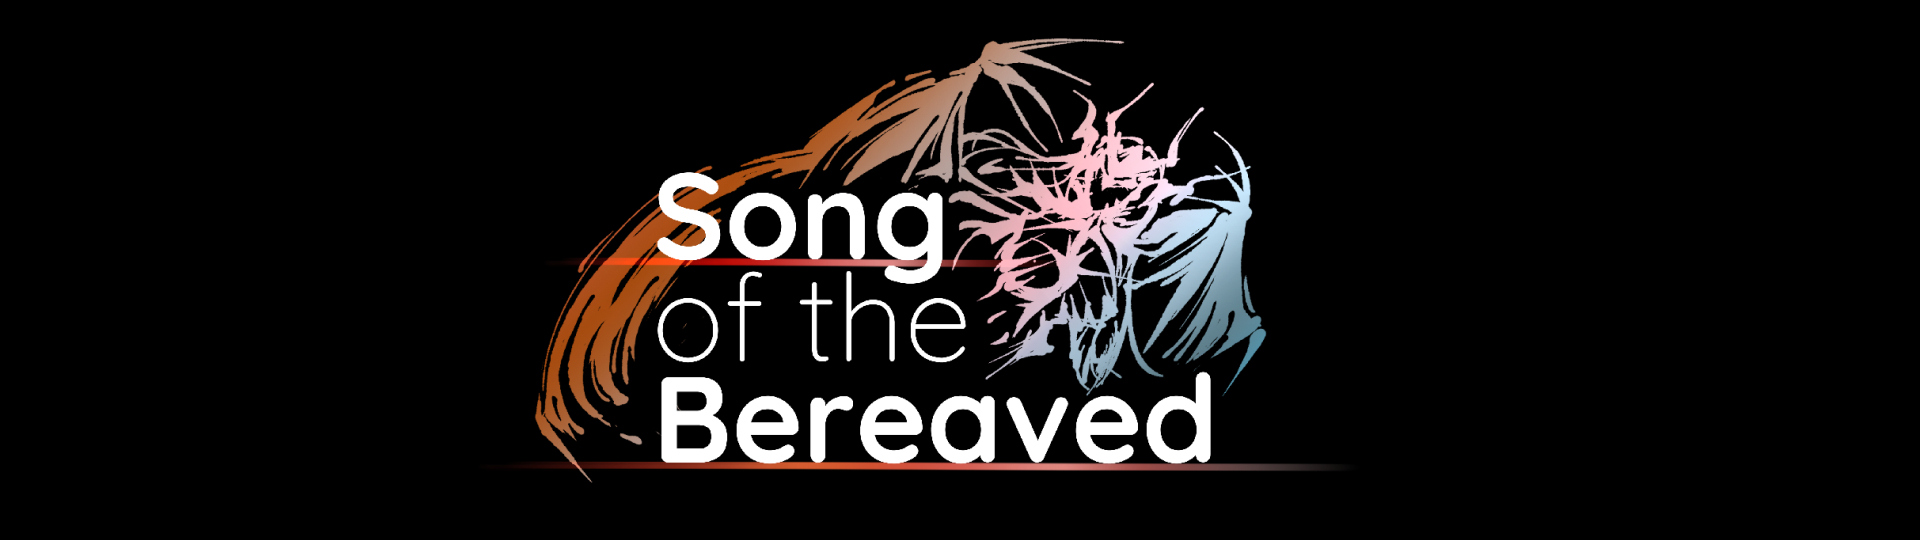 Song of the Bereaved